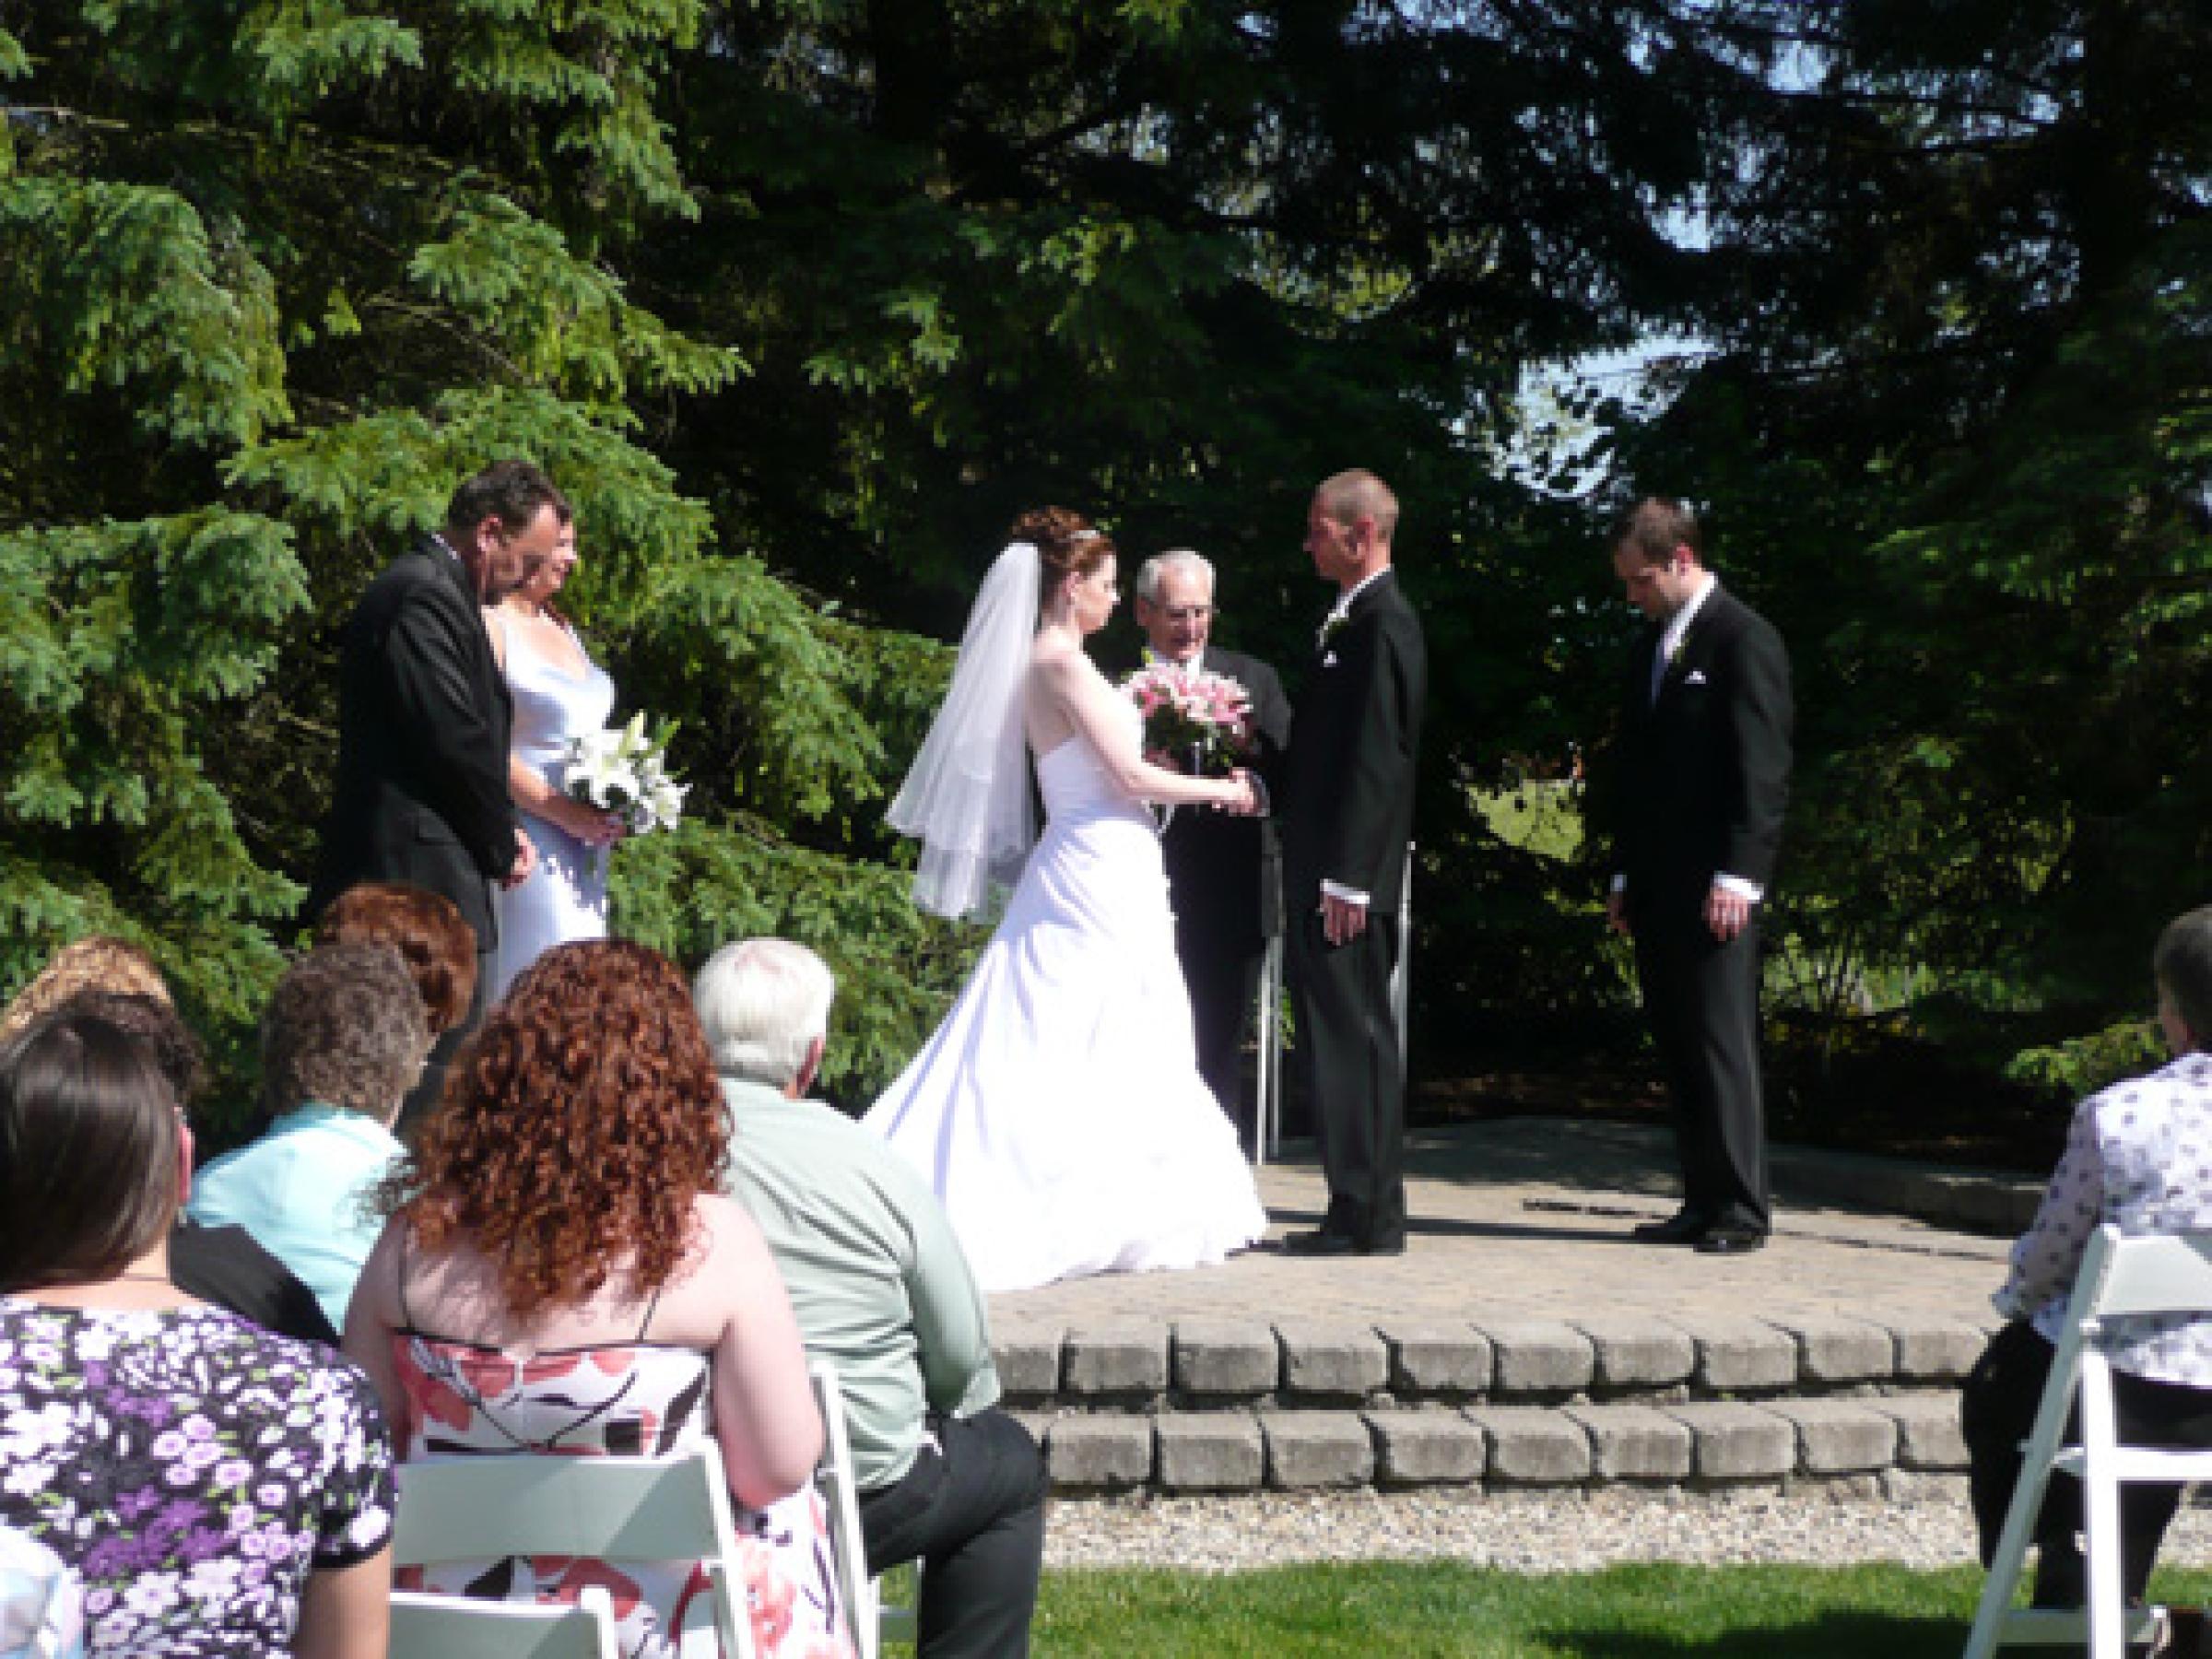 A wedding at Willow Pond Island